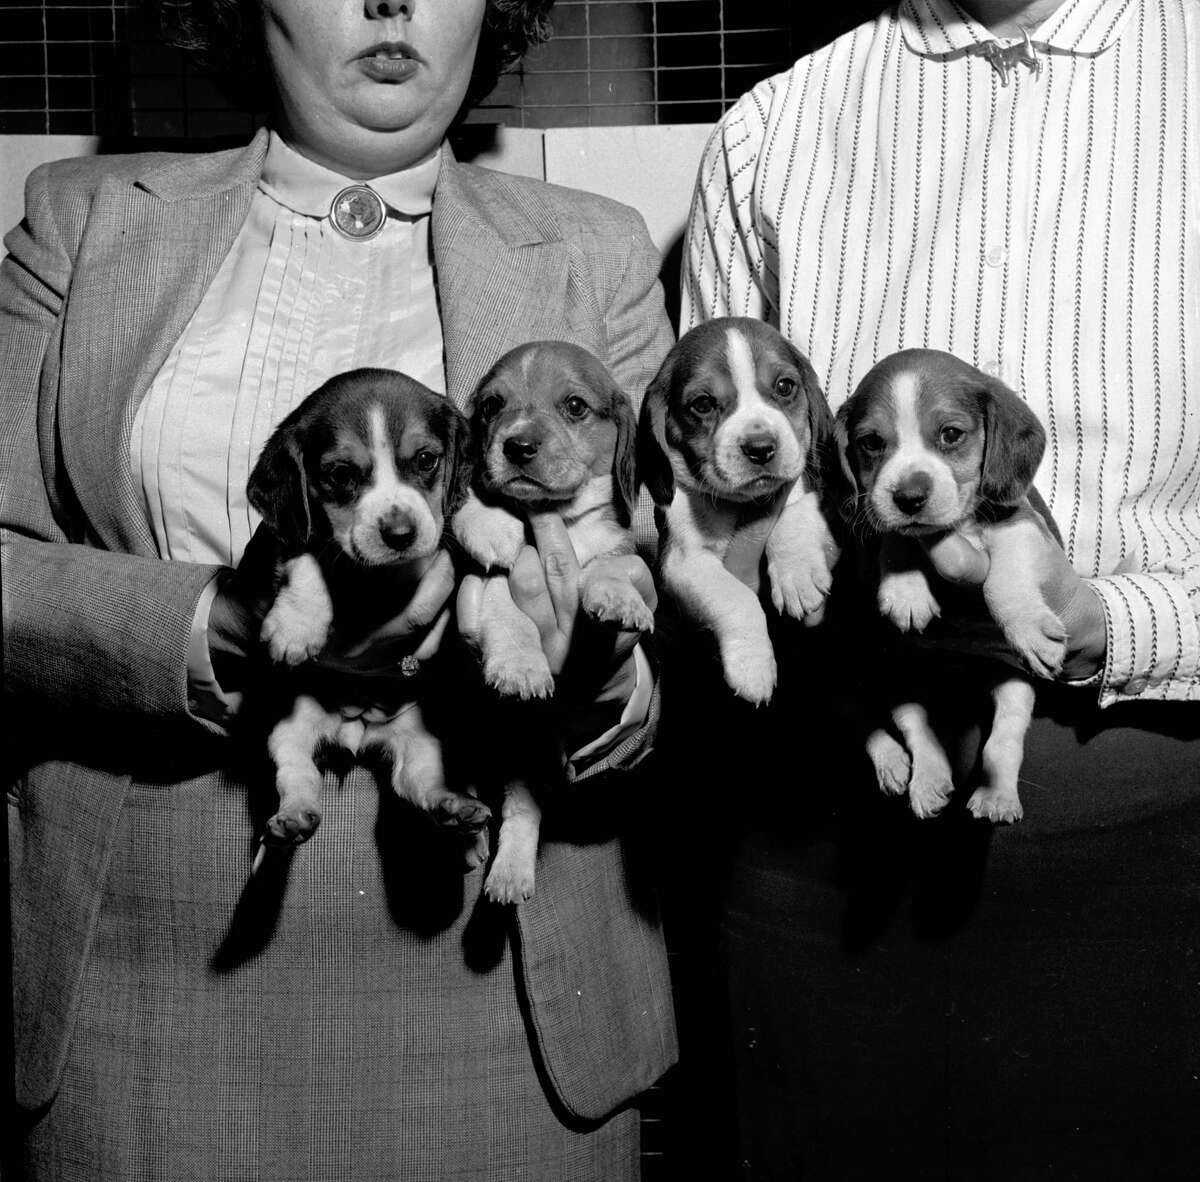 The beagle is a popular breed used as either a house pet or as a hunting dog, 1955.